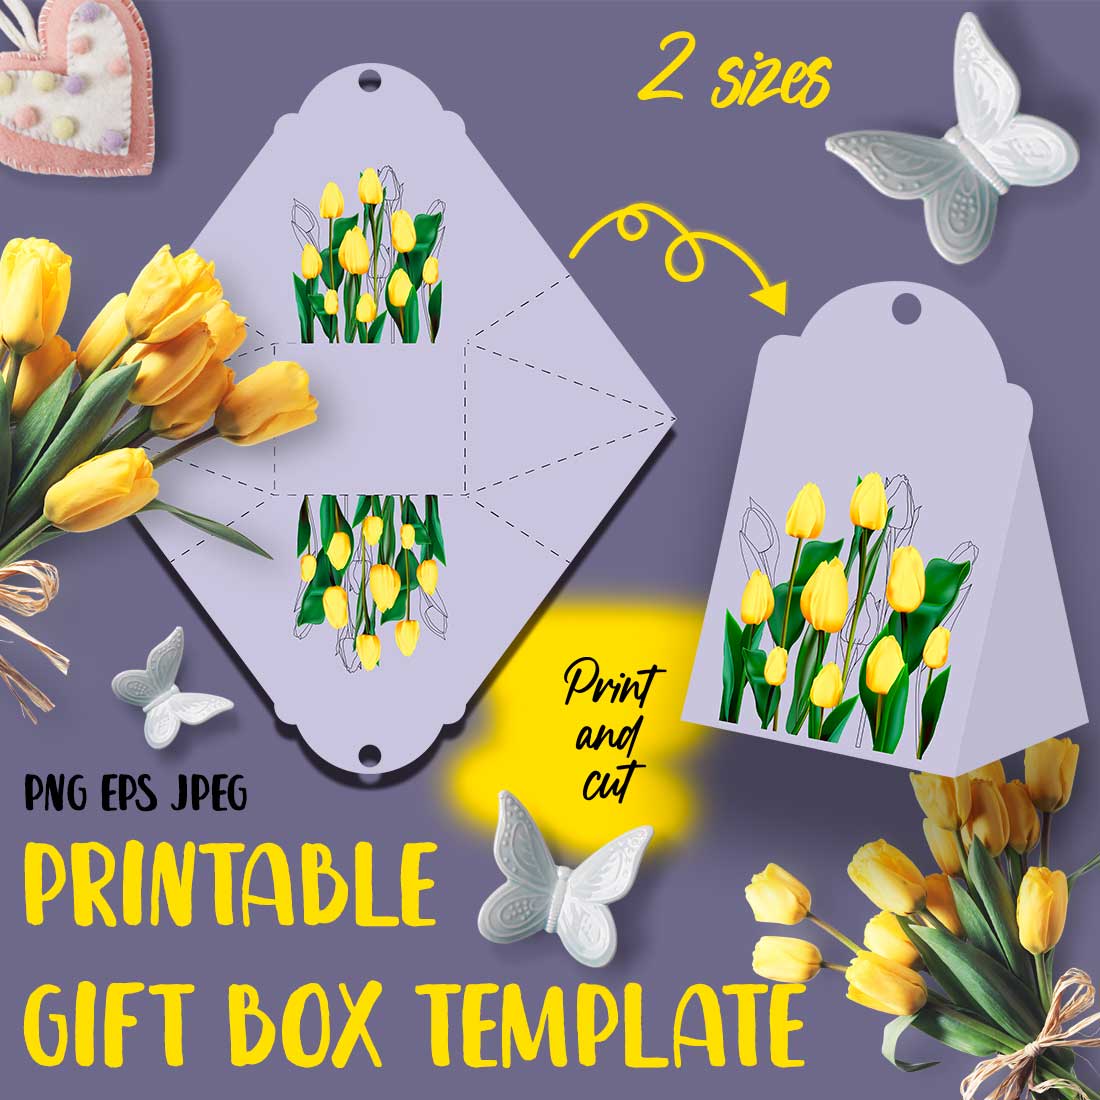 gift box for Mothers Day or March 8th PNG cover image.